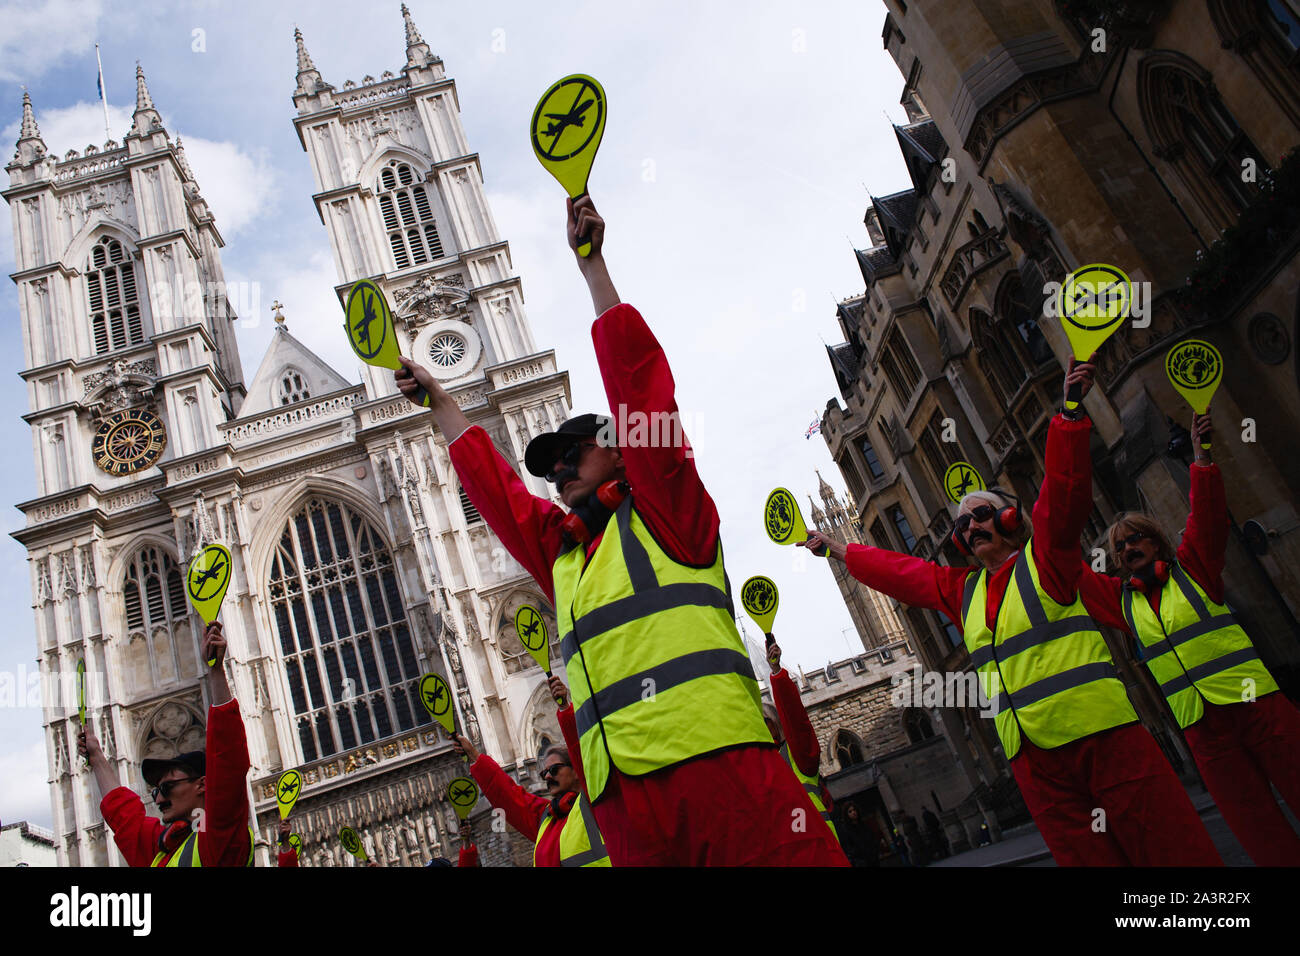 Members of climate change activist movement, Extinction Rebellion (XR) dressed as air traffic controllers, with paddles bearing anti-aviation logos, demonstrating in front of Westminster Abbey during the third day of the group's 'International Rebellion' in London.Police officers continue to clear demonstrators and tents from sites across Westminster, with activists having been warned about moving to a designated protest area around Nelson's Column in Trafalgar Square or face arrest. Similar blockades by Extinction Rebellion in April, at sites including Oxford Circus and Waterloo Bridge, saw m Stock Photo